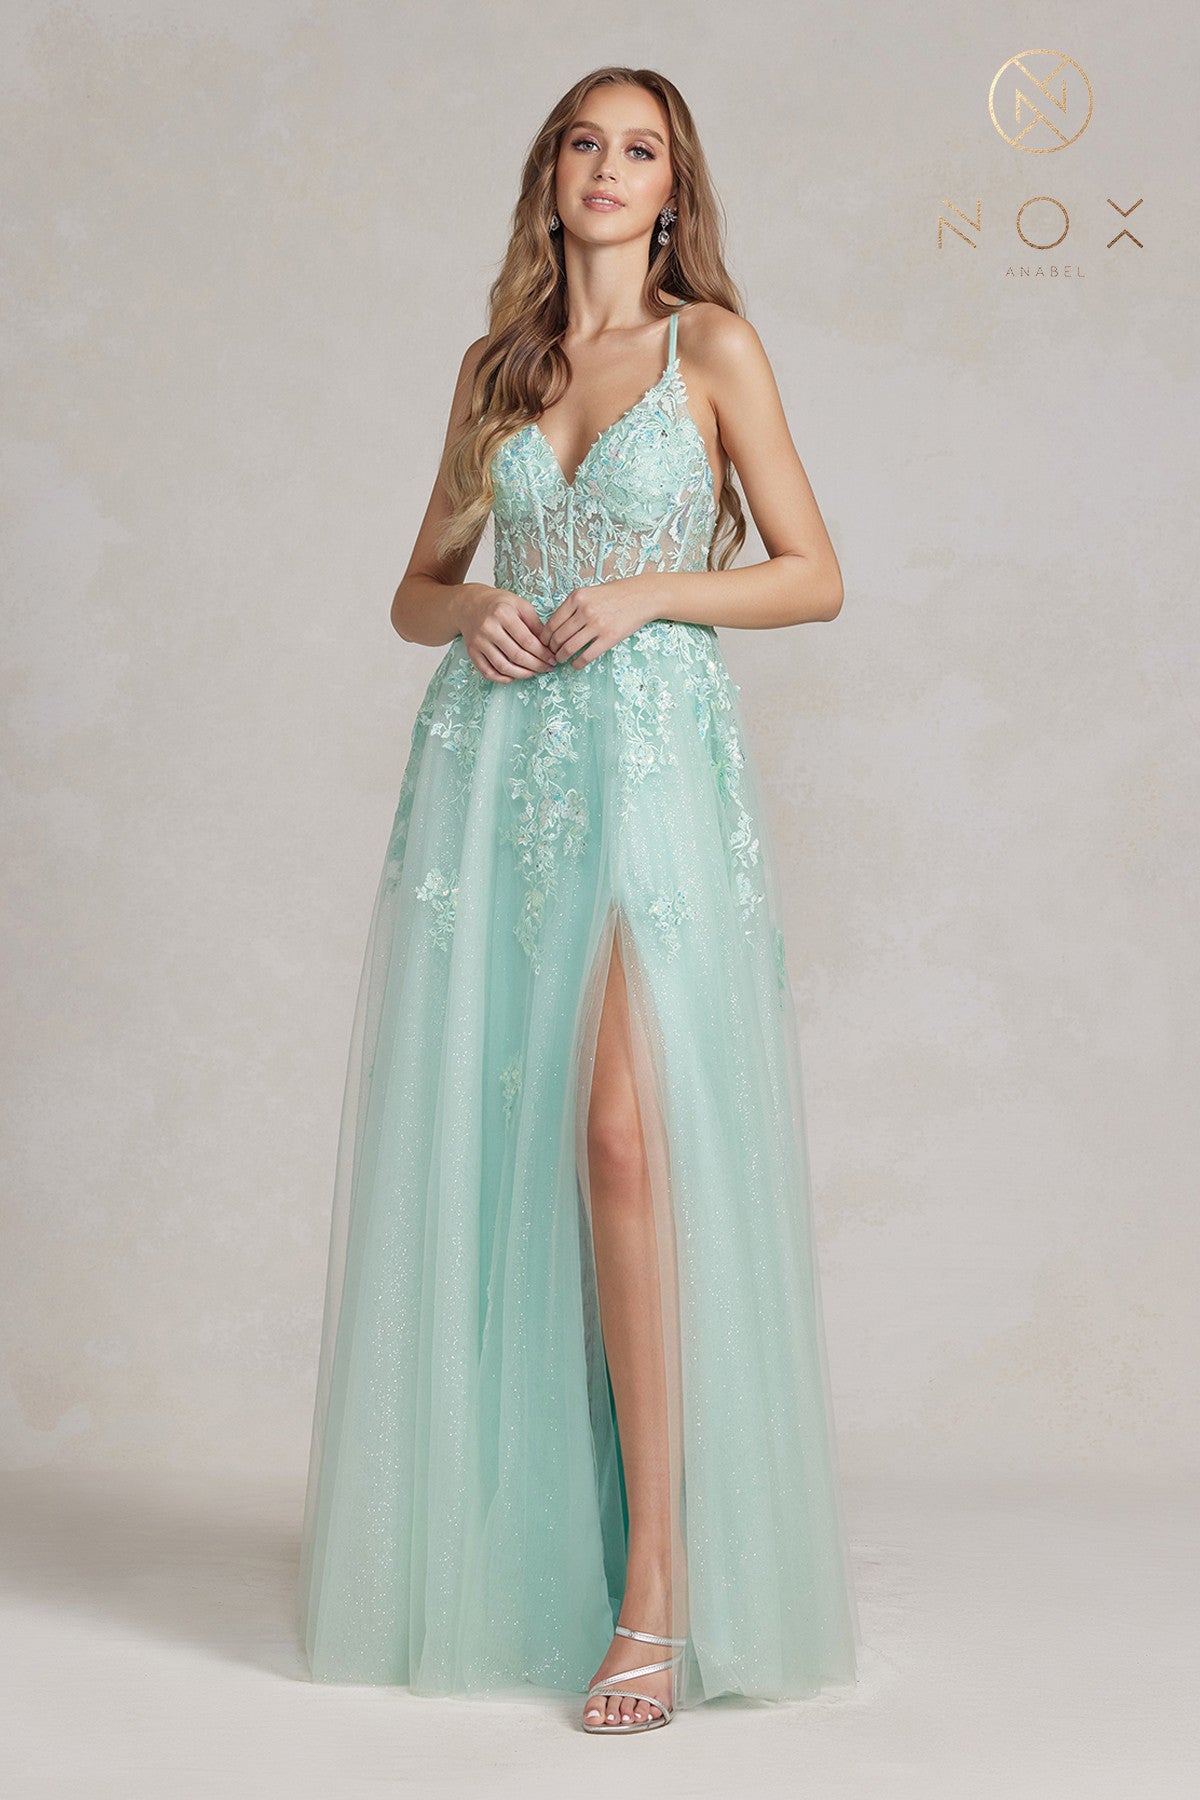 Sleeveless Lace Prom Gown By Nox Anabel -T1081